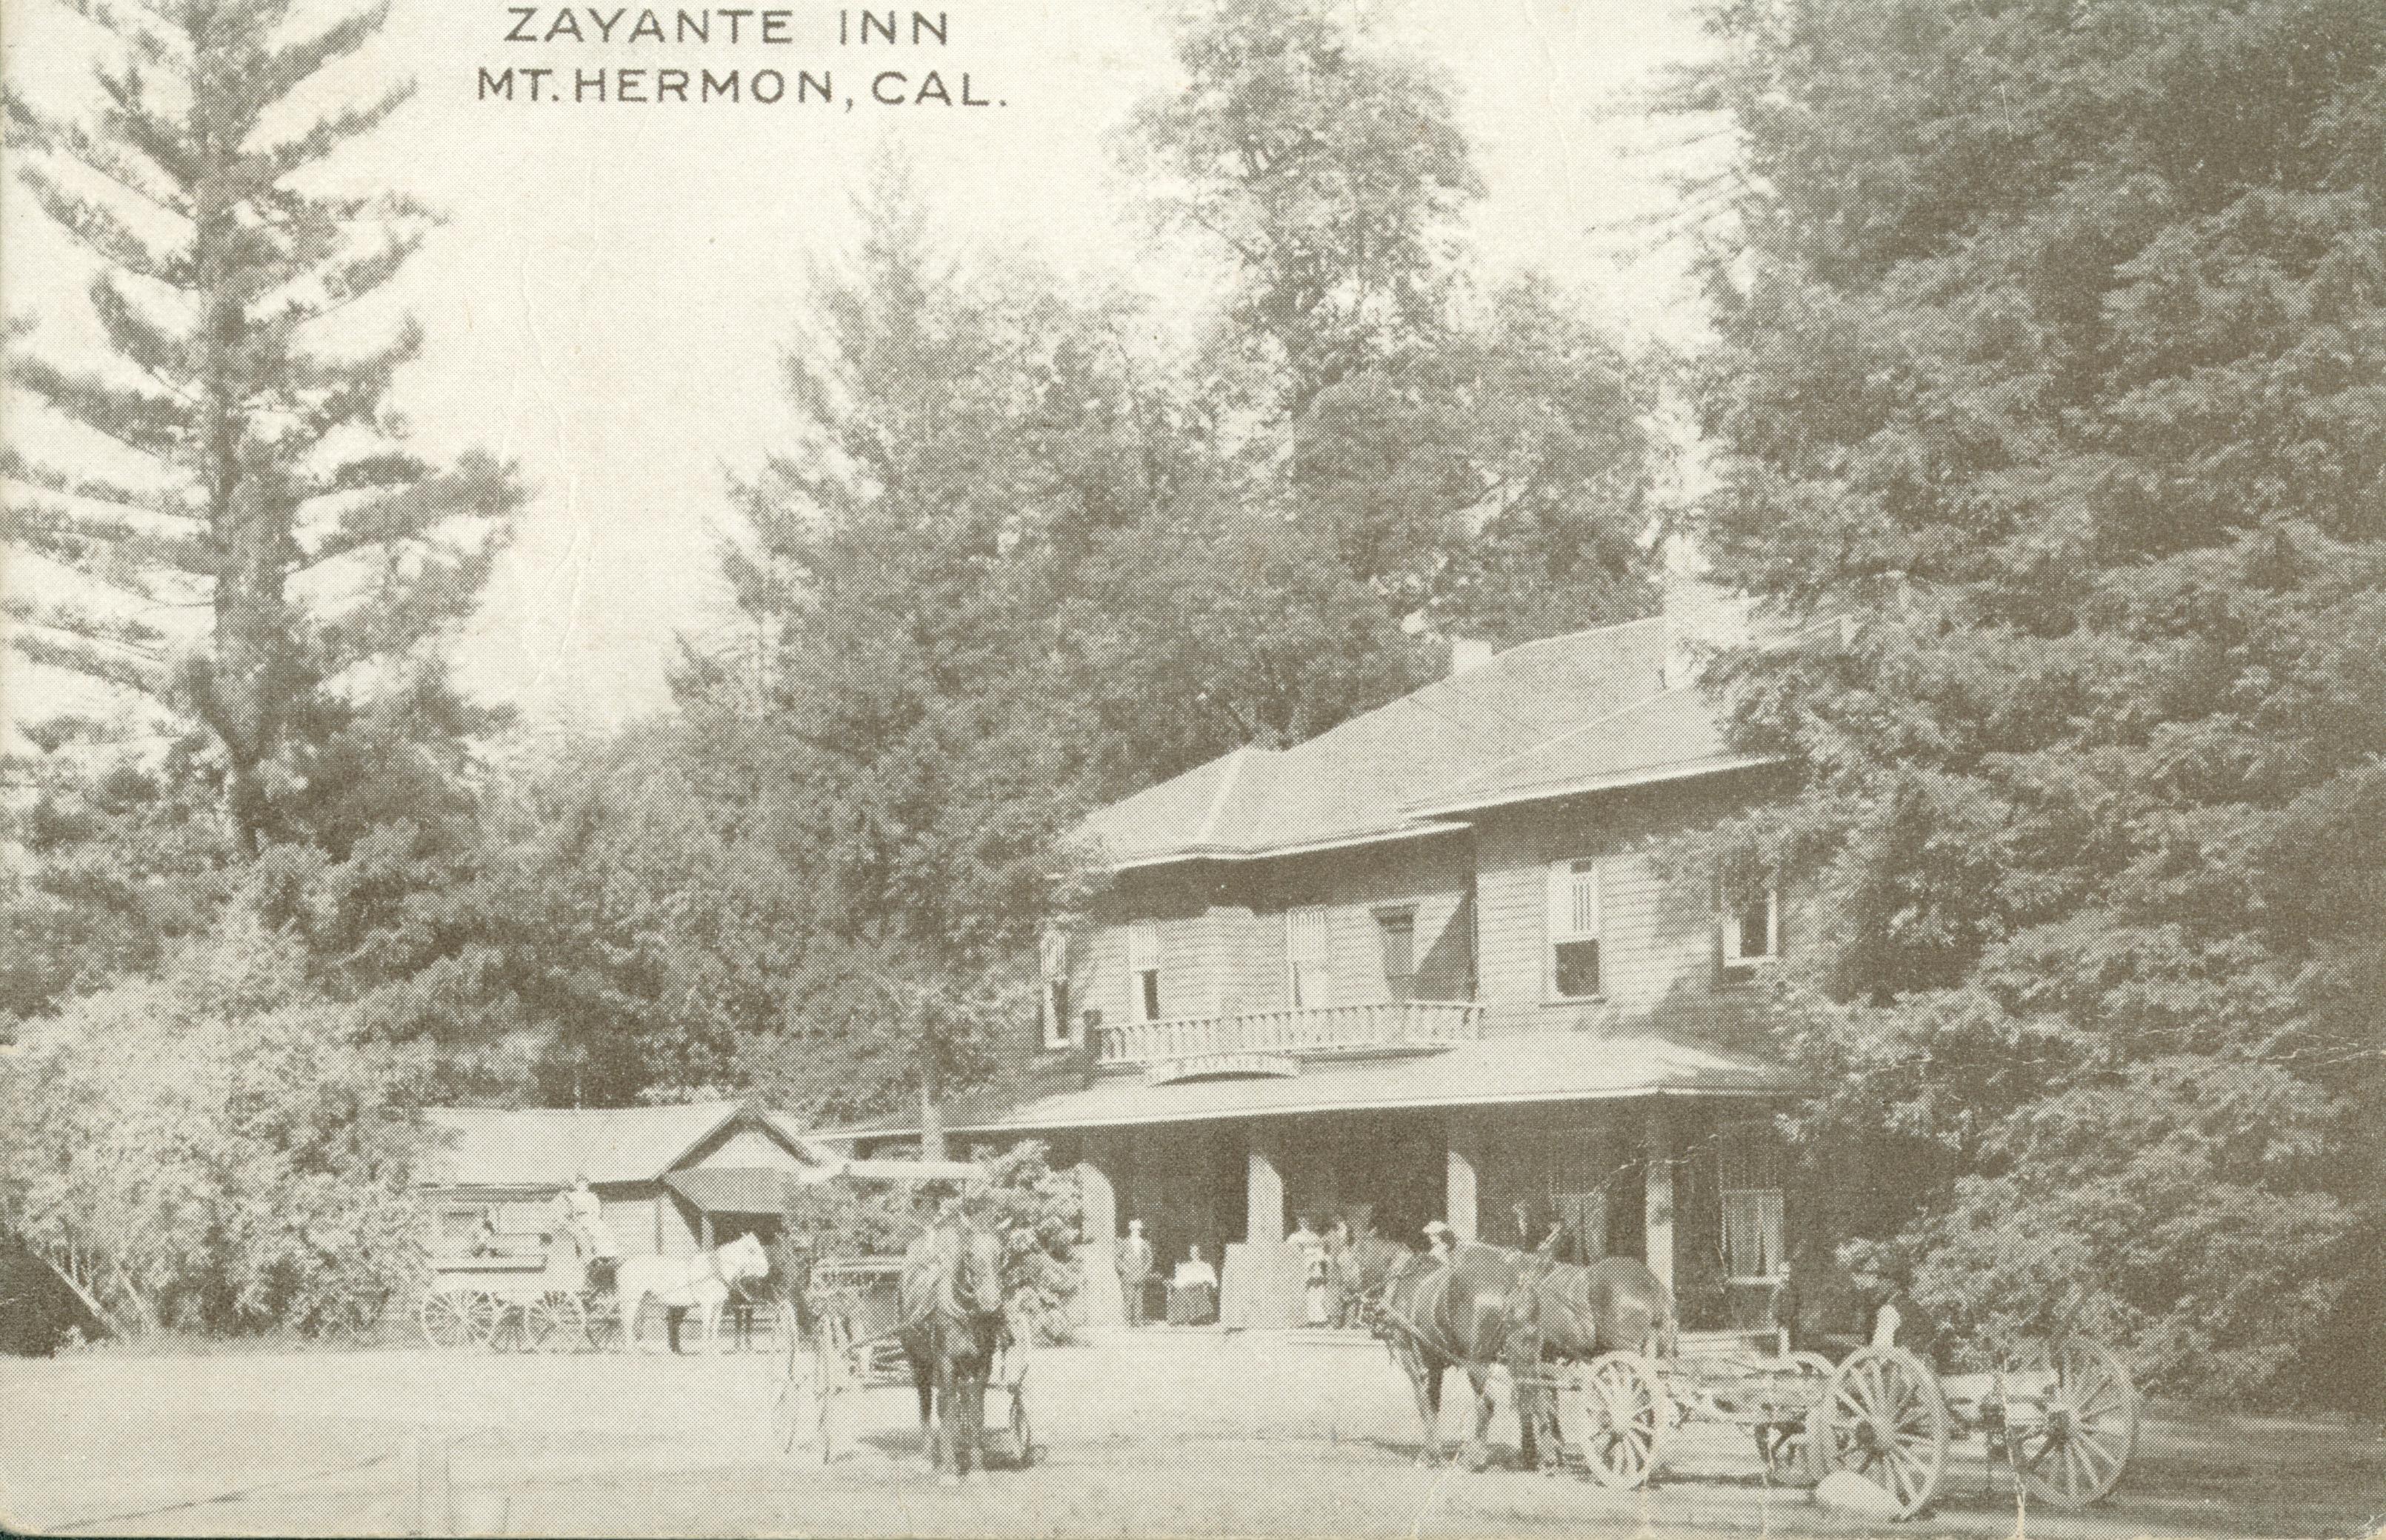 Horse and wagons stand on a path in front of the Zayanta Inn, people are standing and sitting on the porch of the inn, surrounded by trees and large open area in front